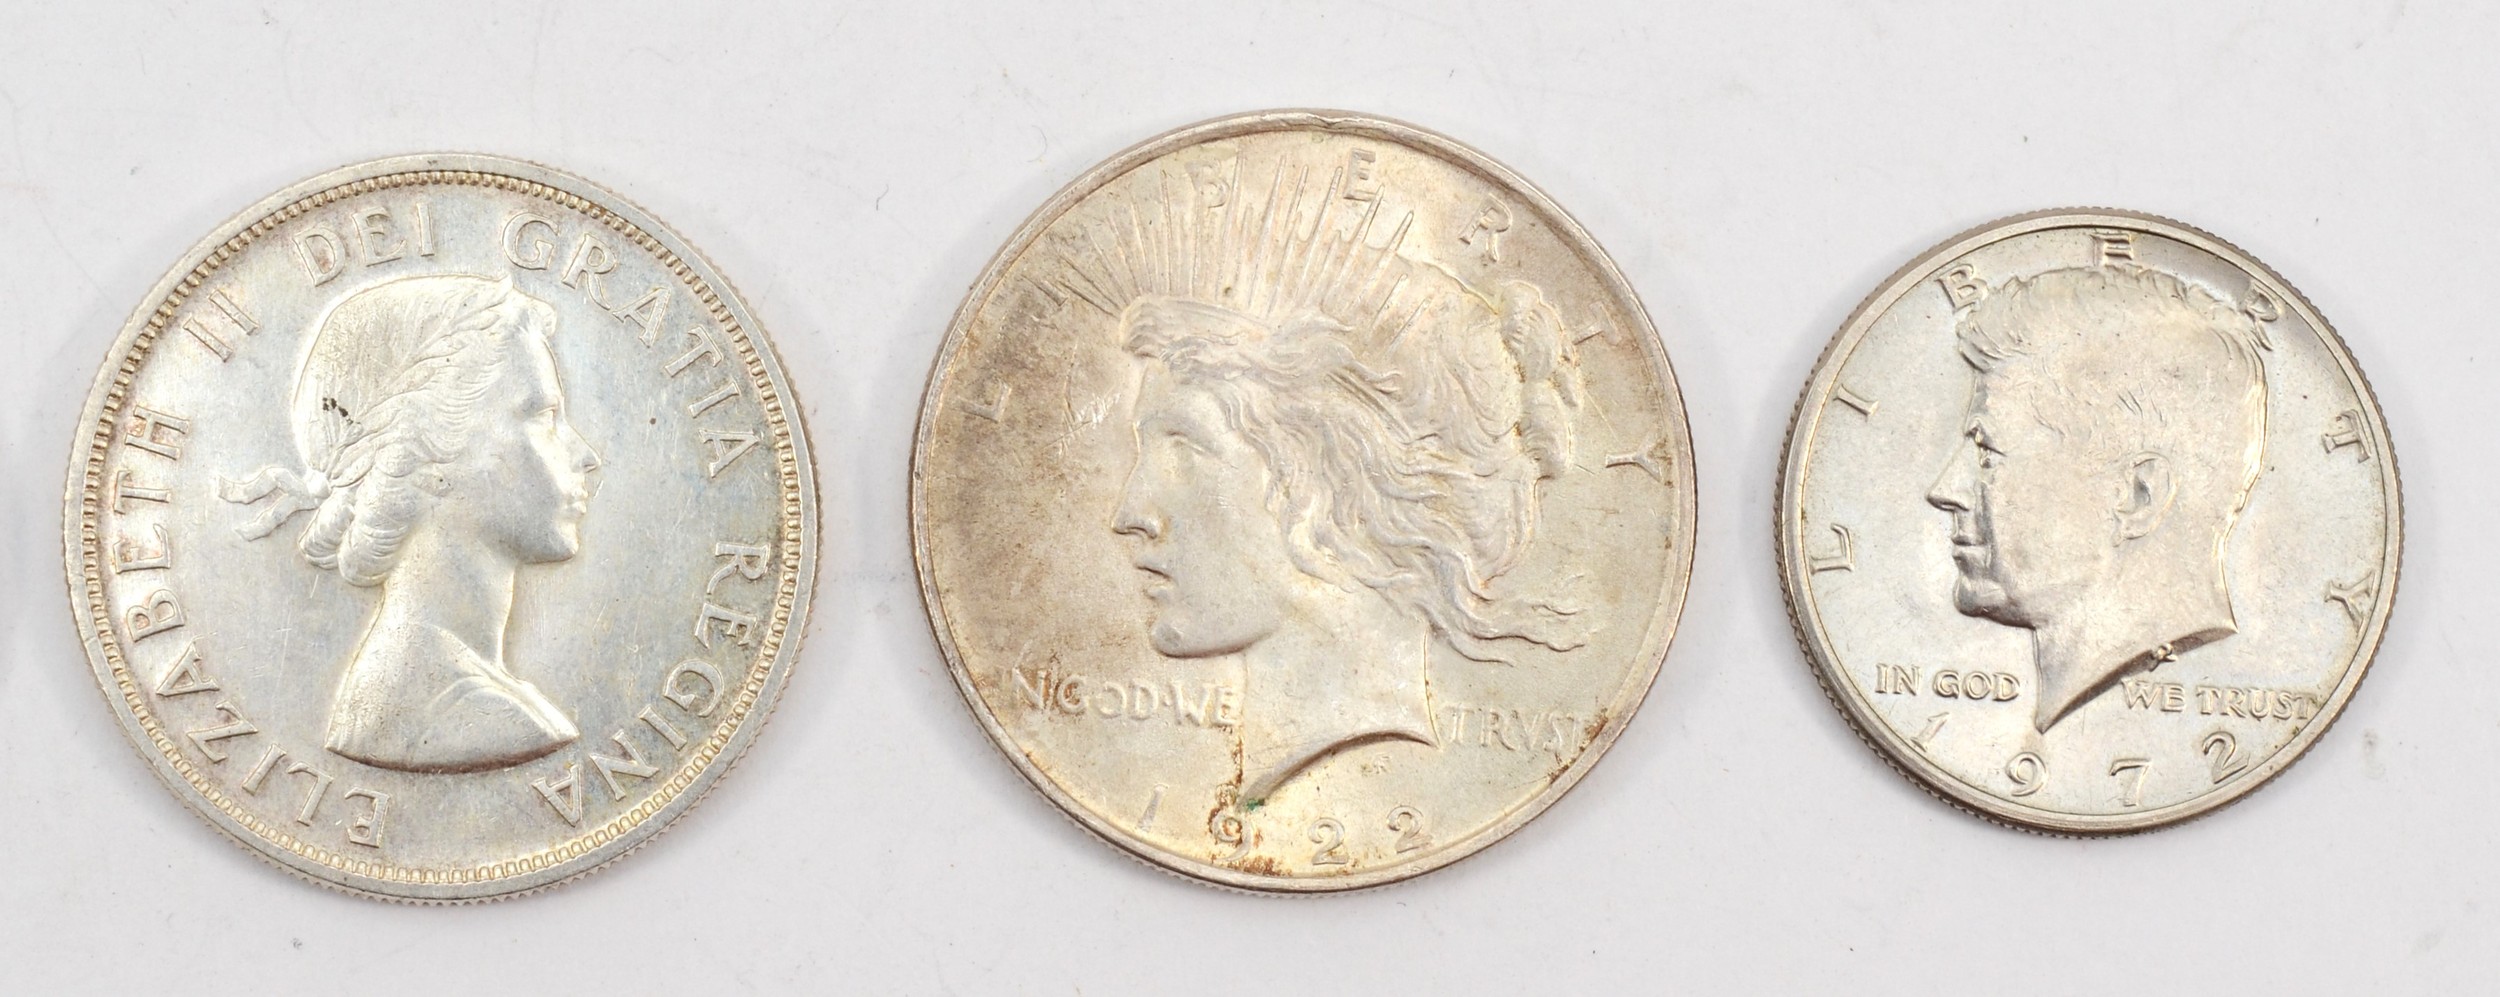 Two 1922 silver low relief peace dollars, a 1972 Kennedy half dollar, a silver Canadian totem pole - Image 3 of 8